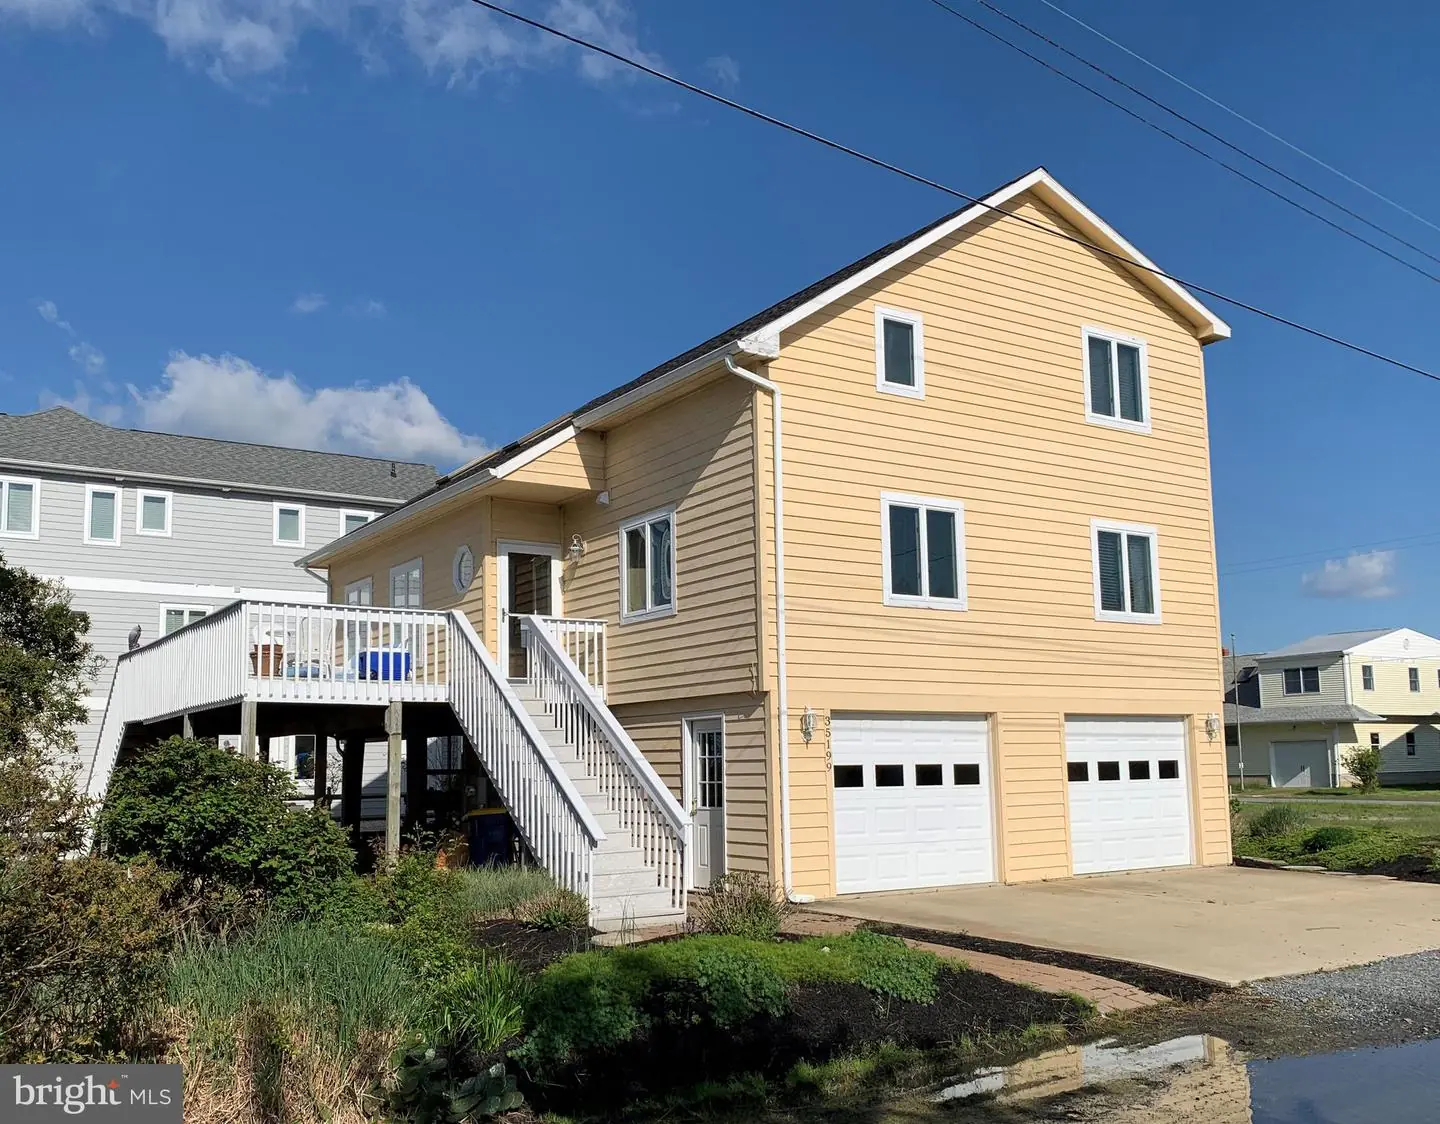 DESU164670-304207560378-2021-07-17-02-03-15 35199 Hassell Ave | Bethany Beach, DE Real Estate For Sale | MLS# Desu164670  - 1st Choice Properties